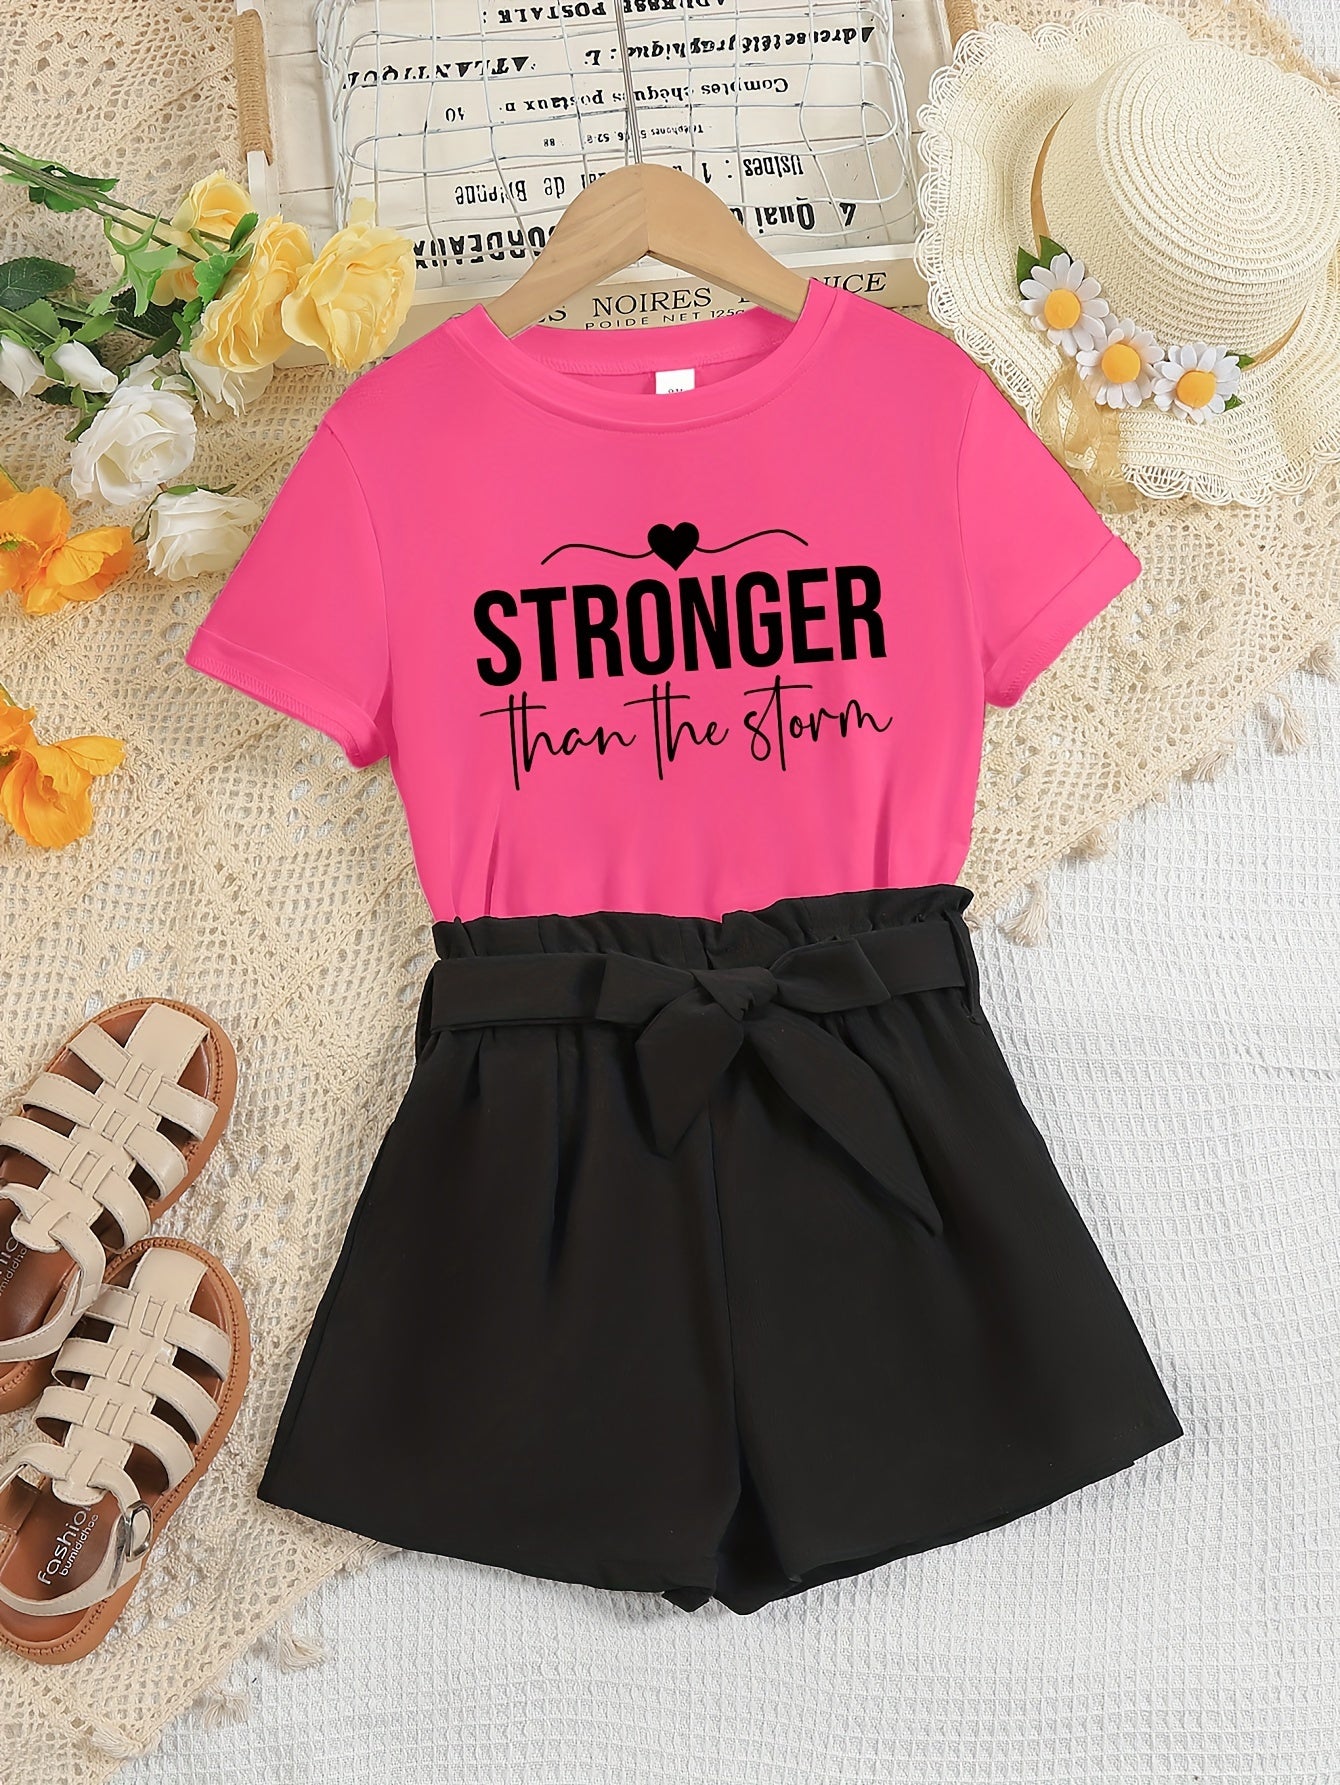 STRONGER THAN THE STORM Youth Christian Casual Outfit claimedbygoddesigns